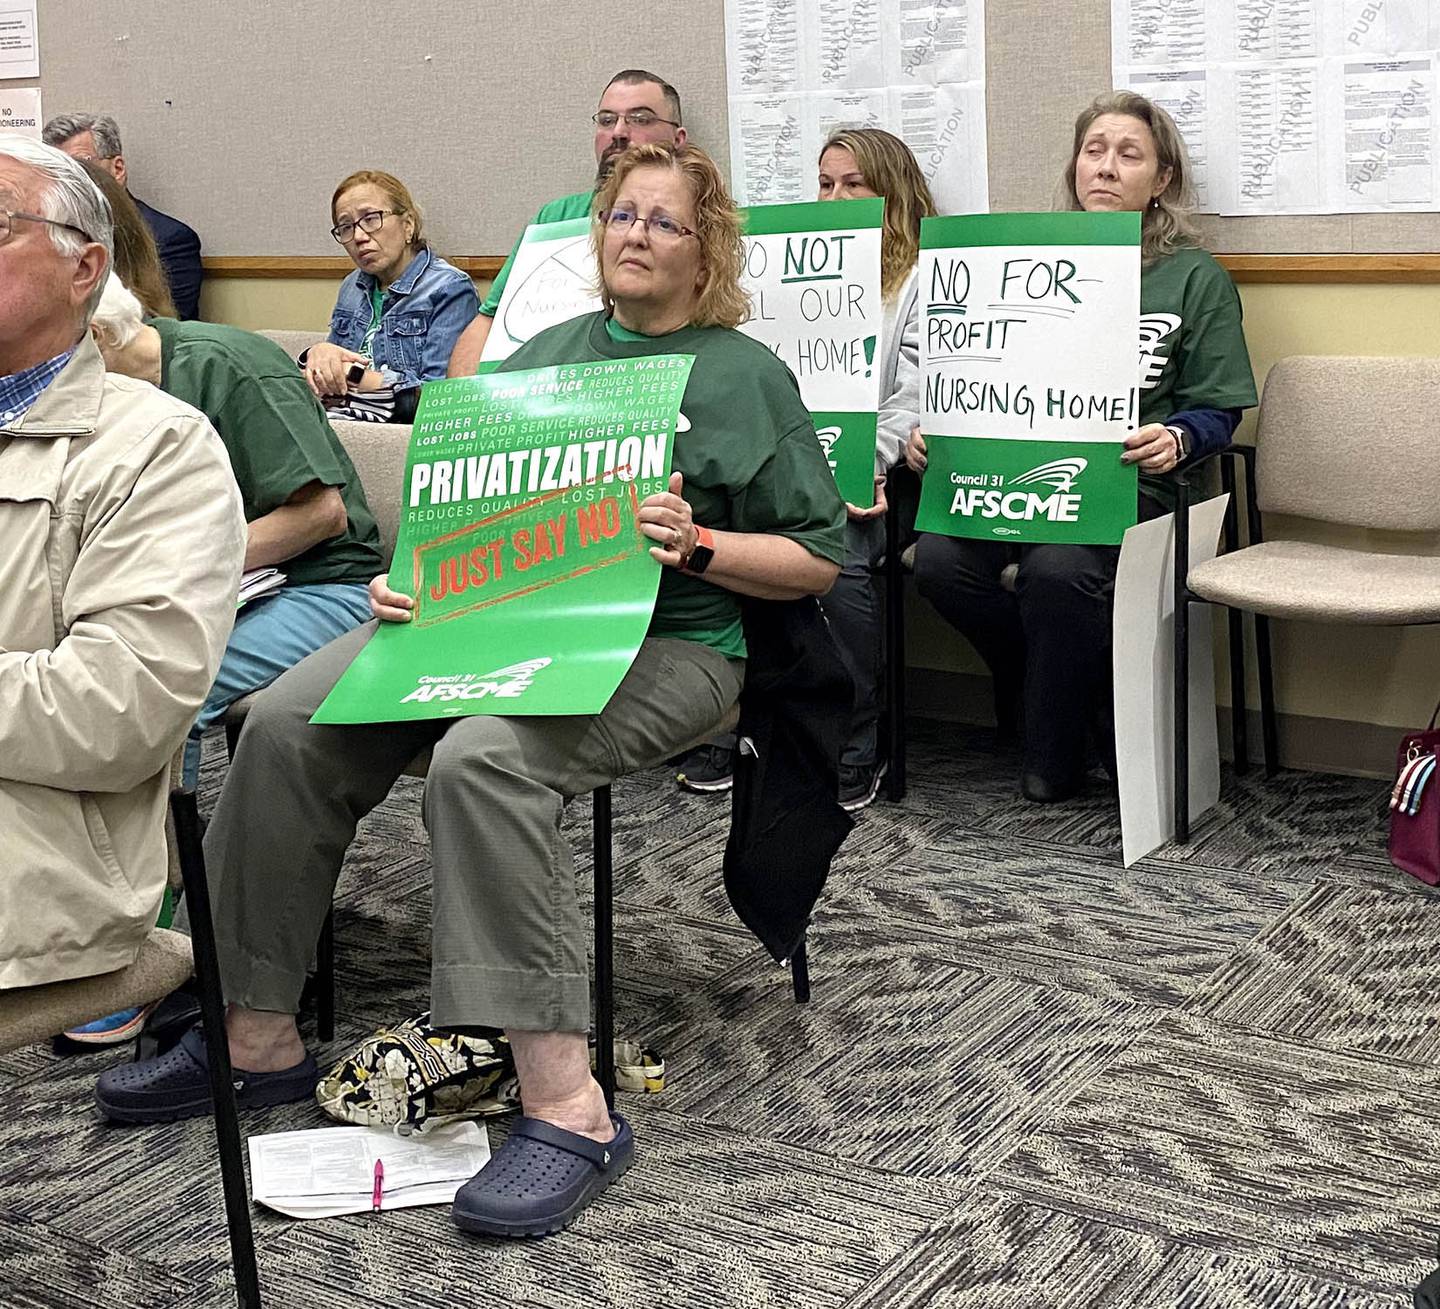 Members of the American Federation of State, County and Municipal Employees #3537, the AFSCME union which represents DeKalb County nursing home employees, hold signs during the DeKalb County Board's Committee of the Whole meeting Wednesday, June 8, 2022, to ask the board not to sell the DeKalb County Rehabilitation and Nursing Center. Union members said a privatization could mean lost benefits for employees, and lowered standards of patient care under new management.